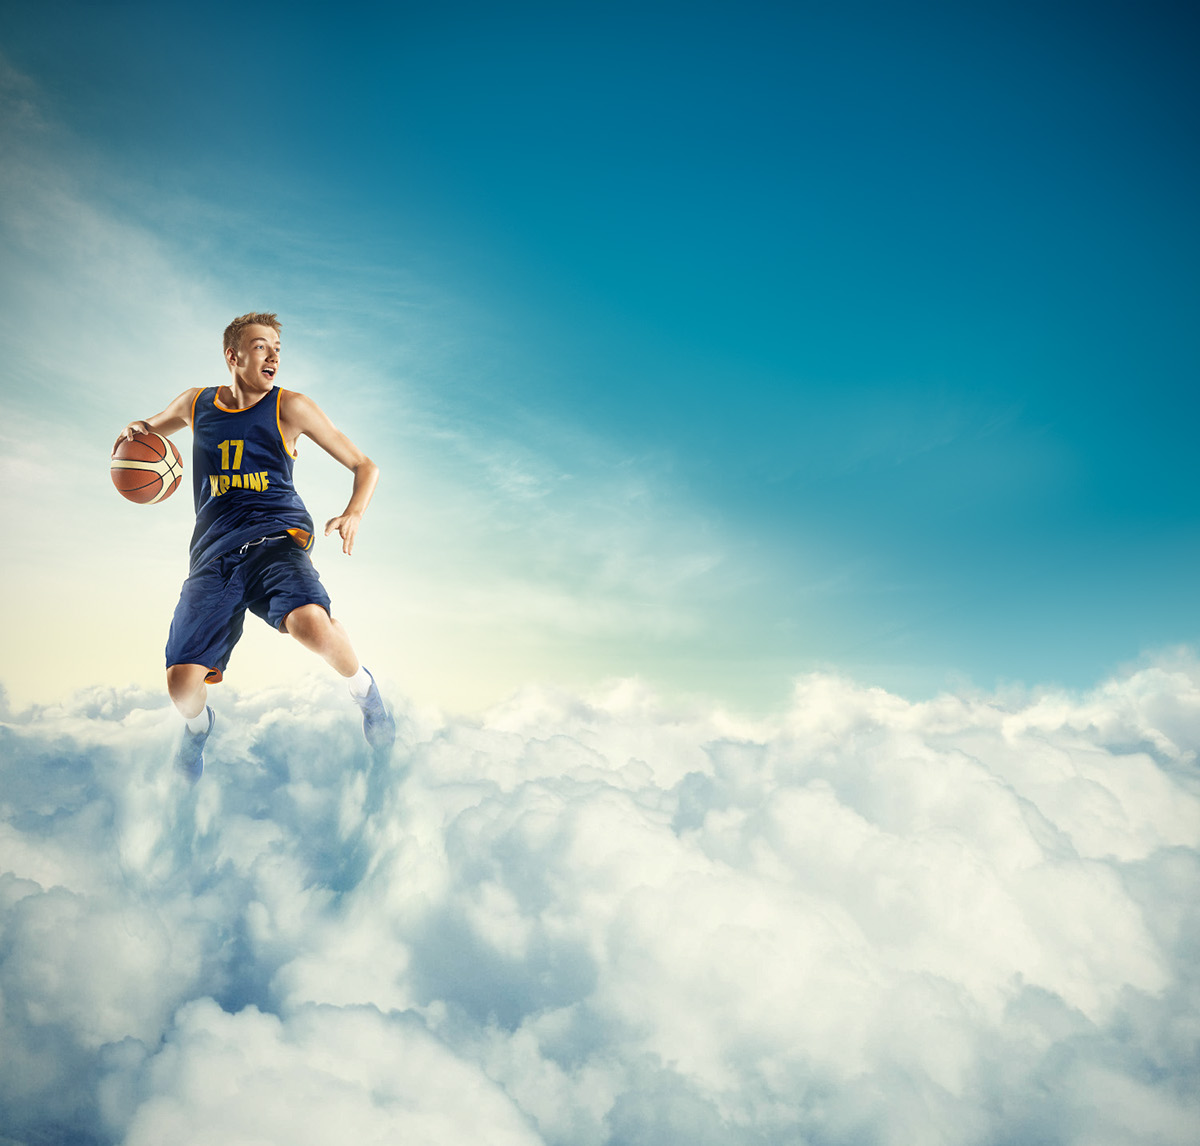 positivepictures positive pictures SKY clouds basketball ball postprocessing postproduction